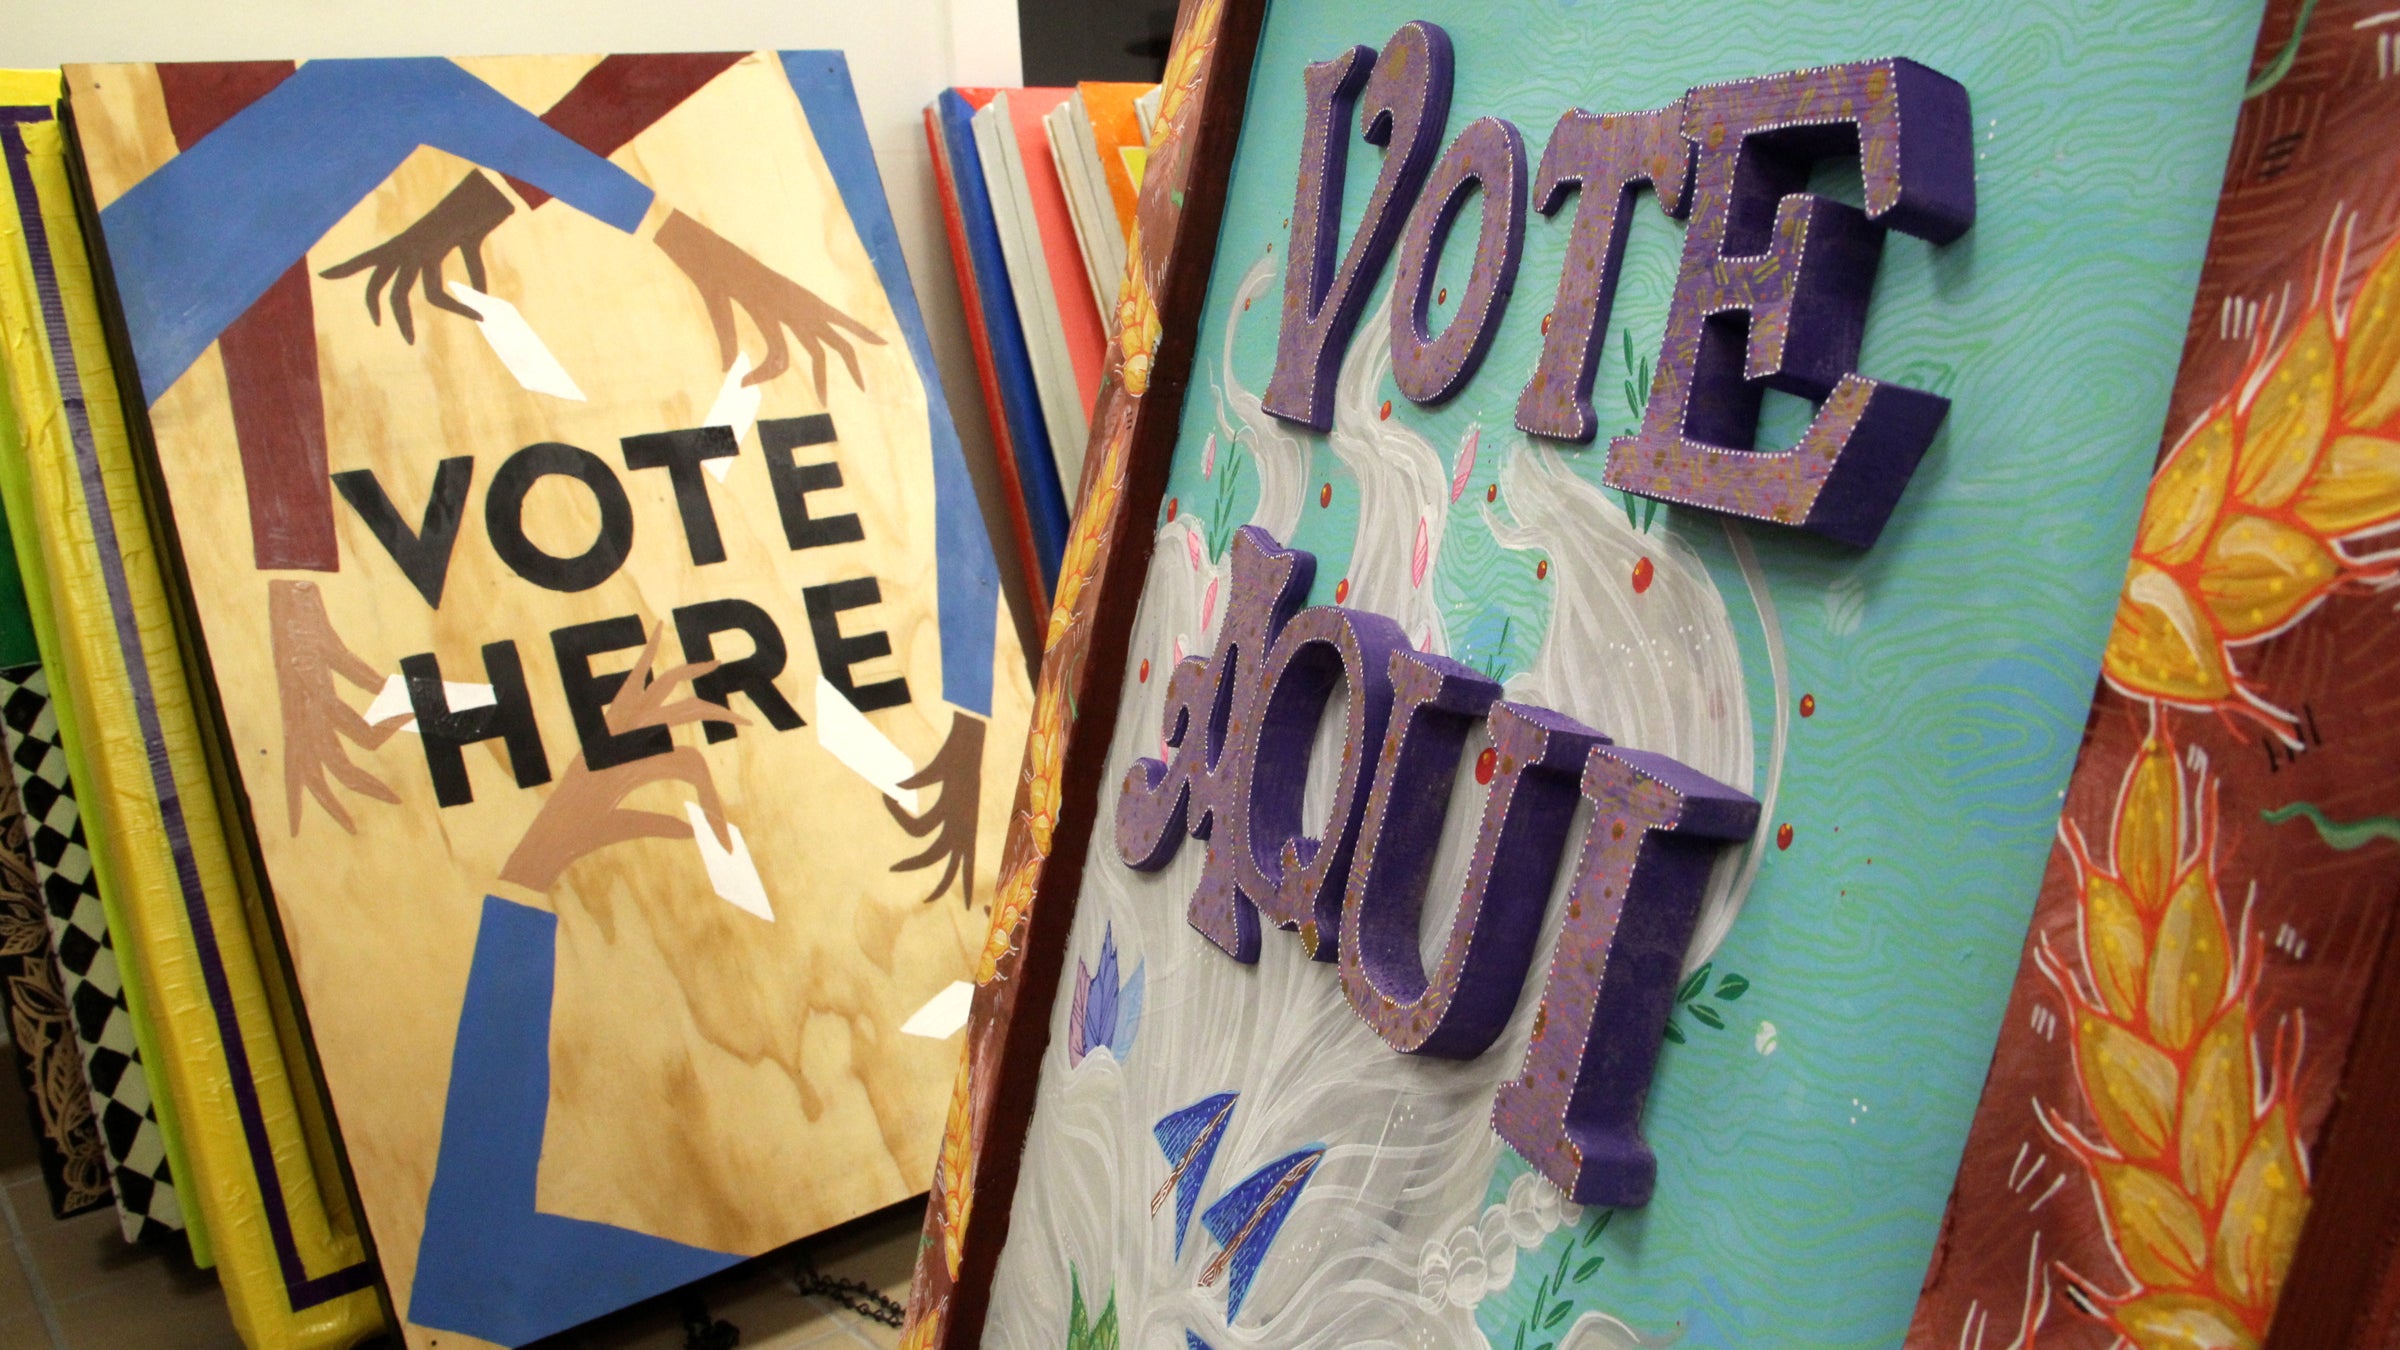 Sixty signs were made by local artists as part of the Next Stop, Democracy project, funded by the Knight Foundation, aimed at improving voter turnout. (Emma Lee/WHYY)